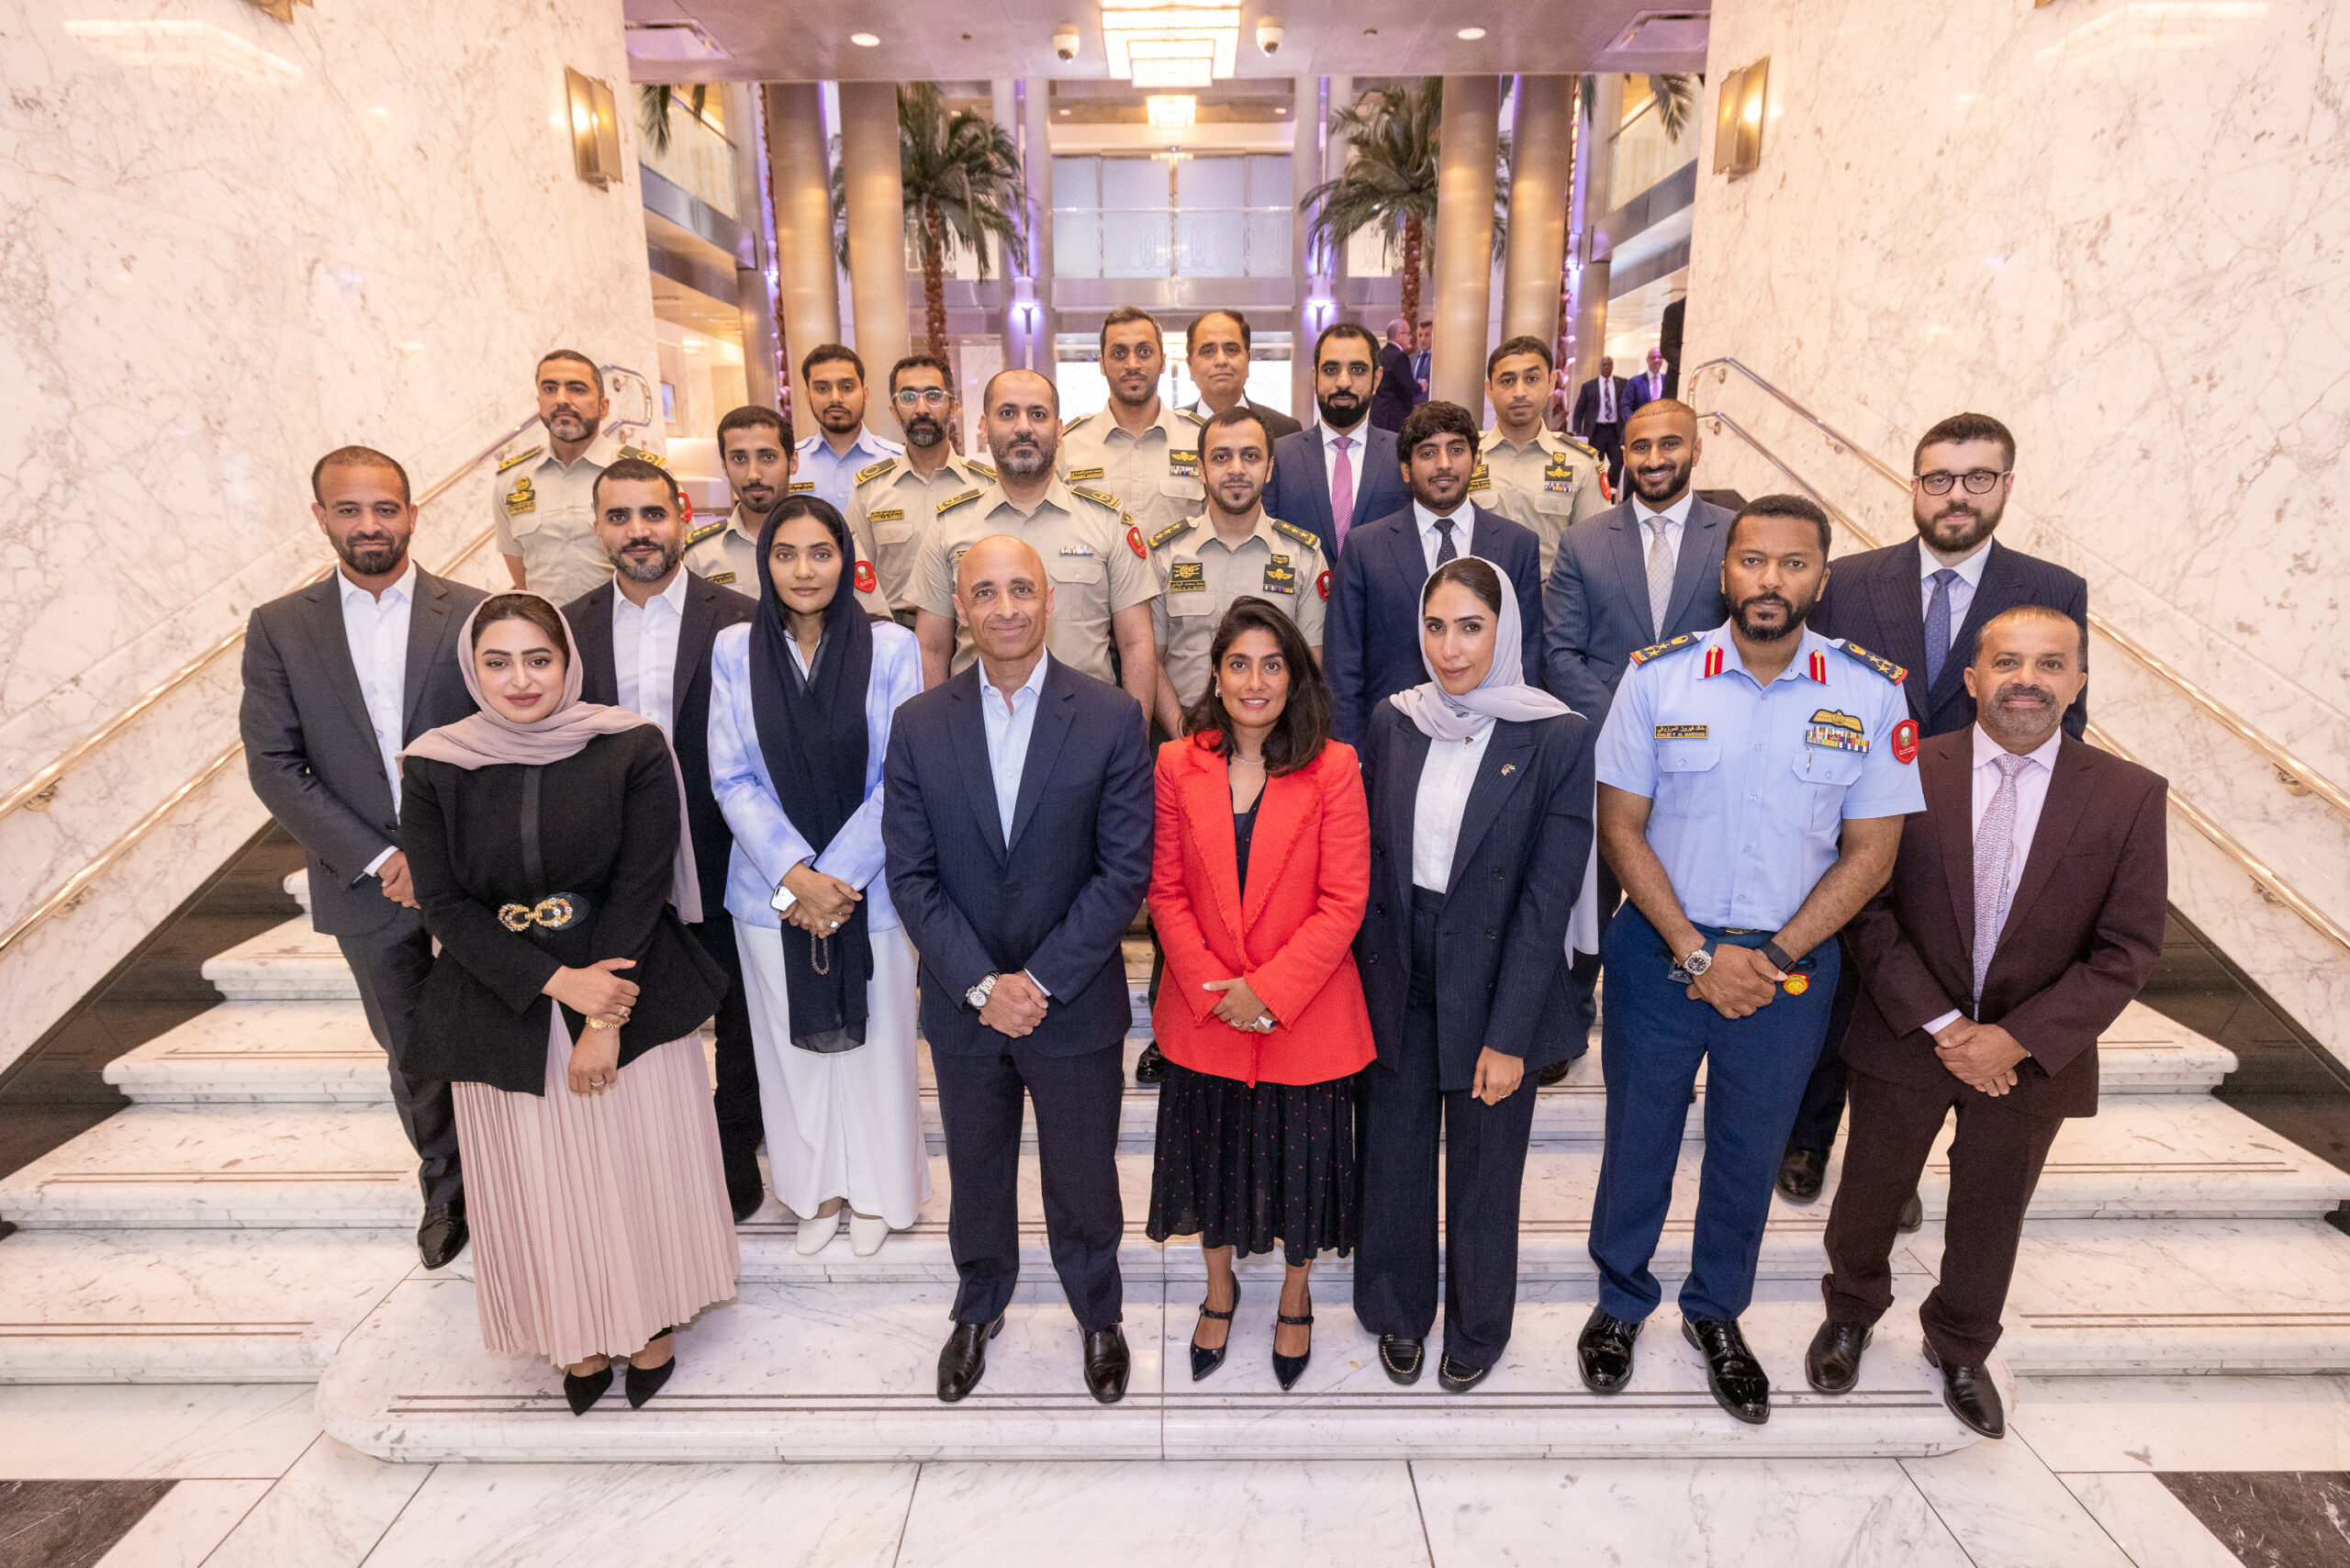 Yousef Al Otaiba and other members of staff at the UAE Embassy pose for a picture.